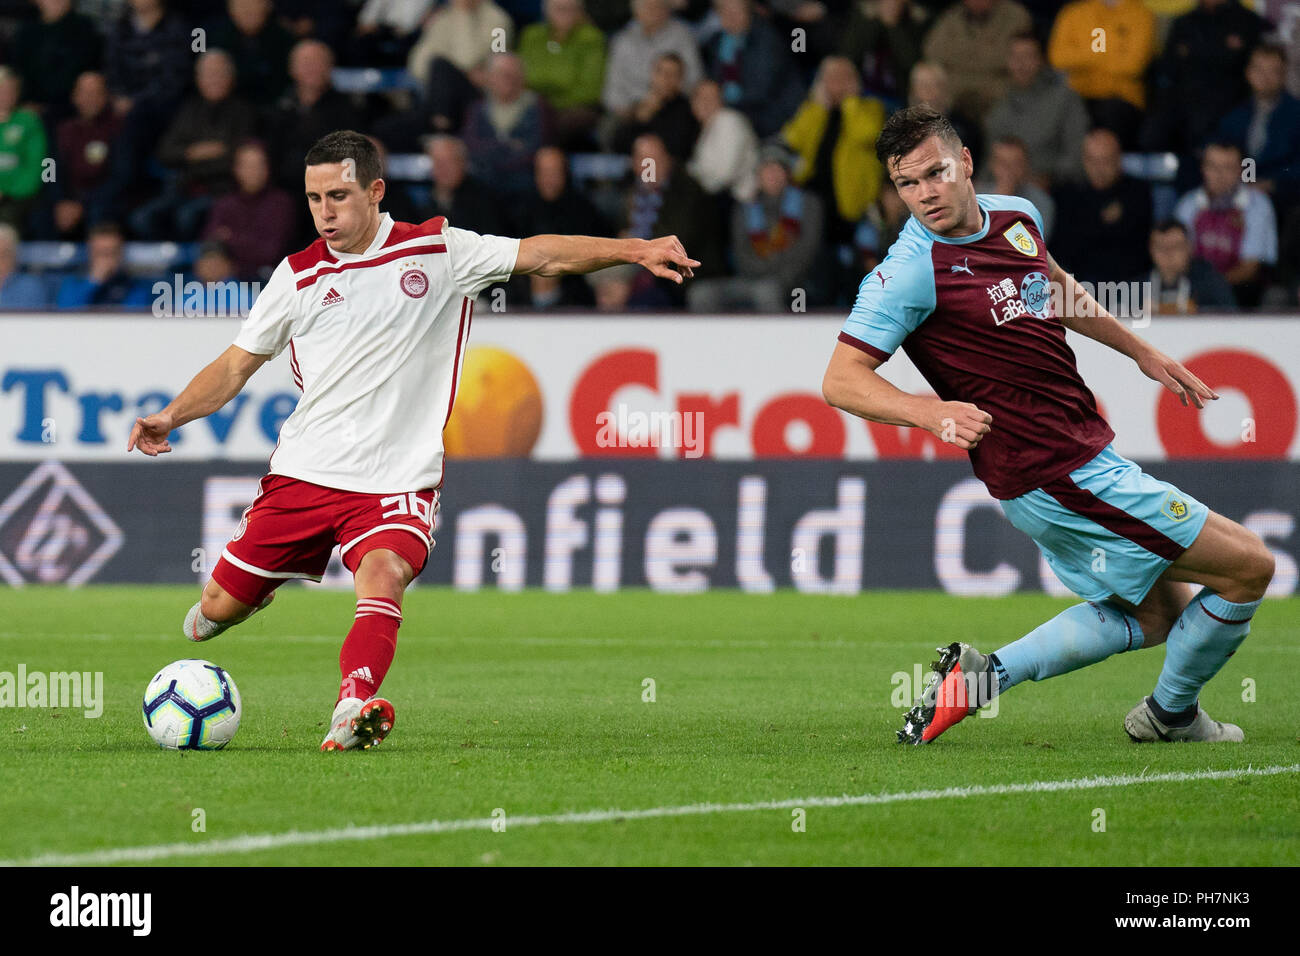 Burnley, UK. 30th August 2018. Olympiacos's Daniel Podence scores his sides  first goal 30th August 2018, Turf Moor, Burnley, England; UEFA Europa  League, Play off leg 2 of 2, Burnley v Olympiacos